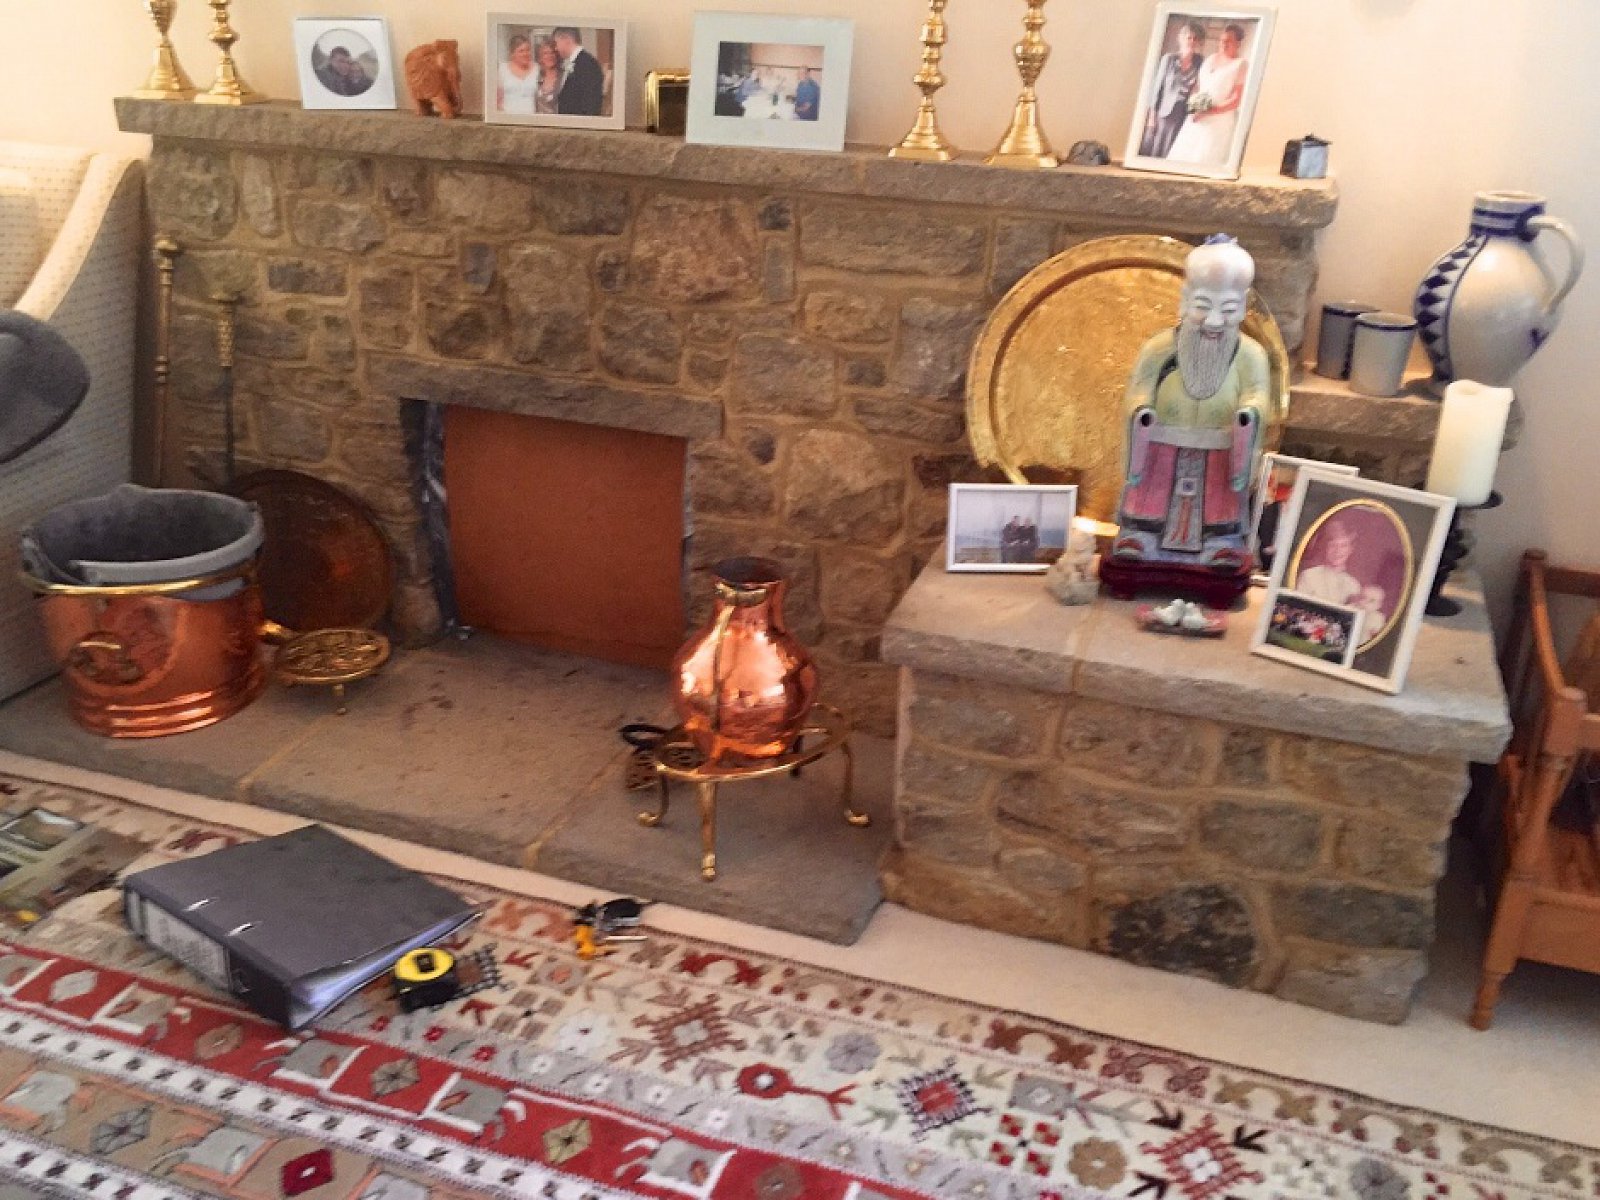 An image of an existing fireplace